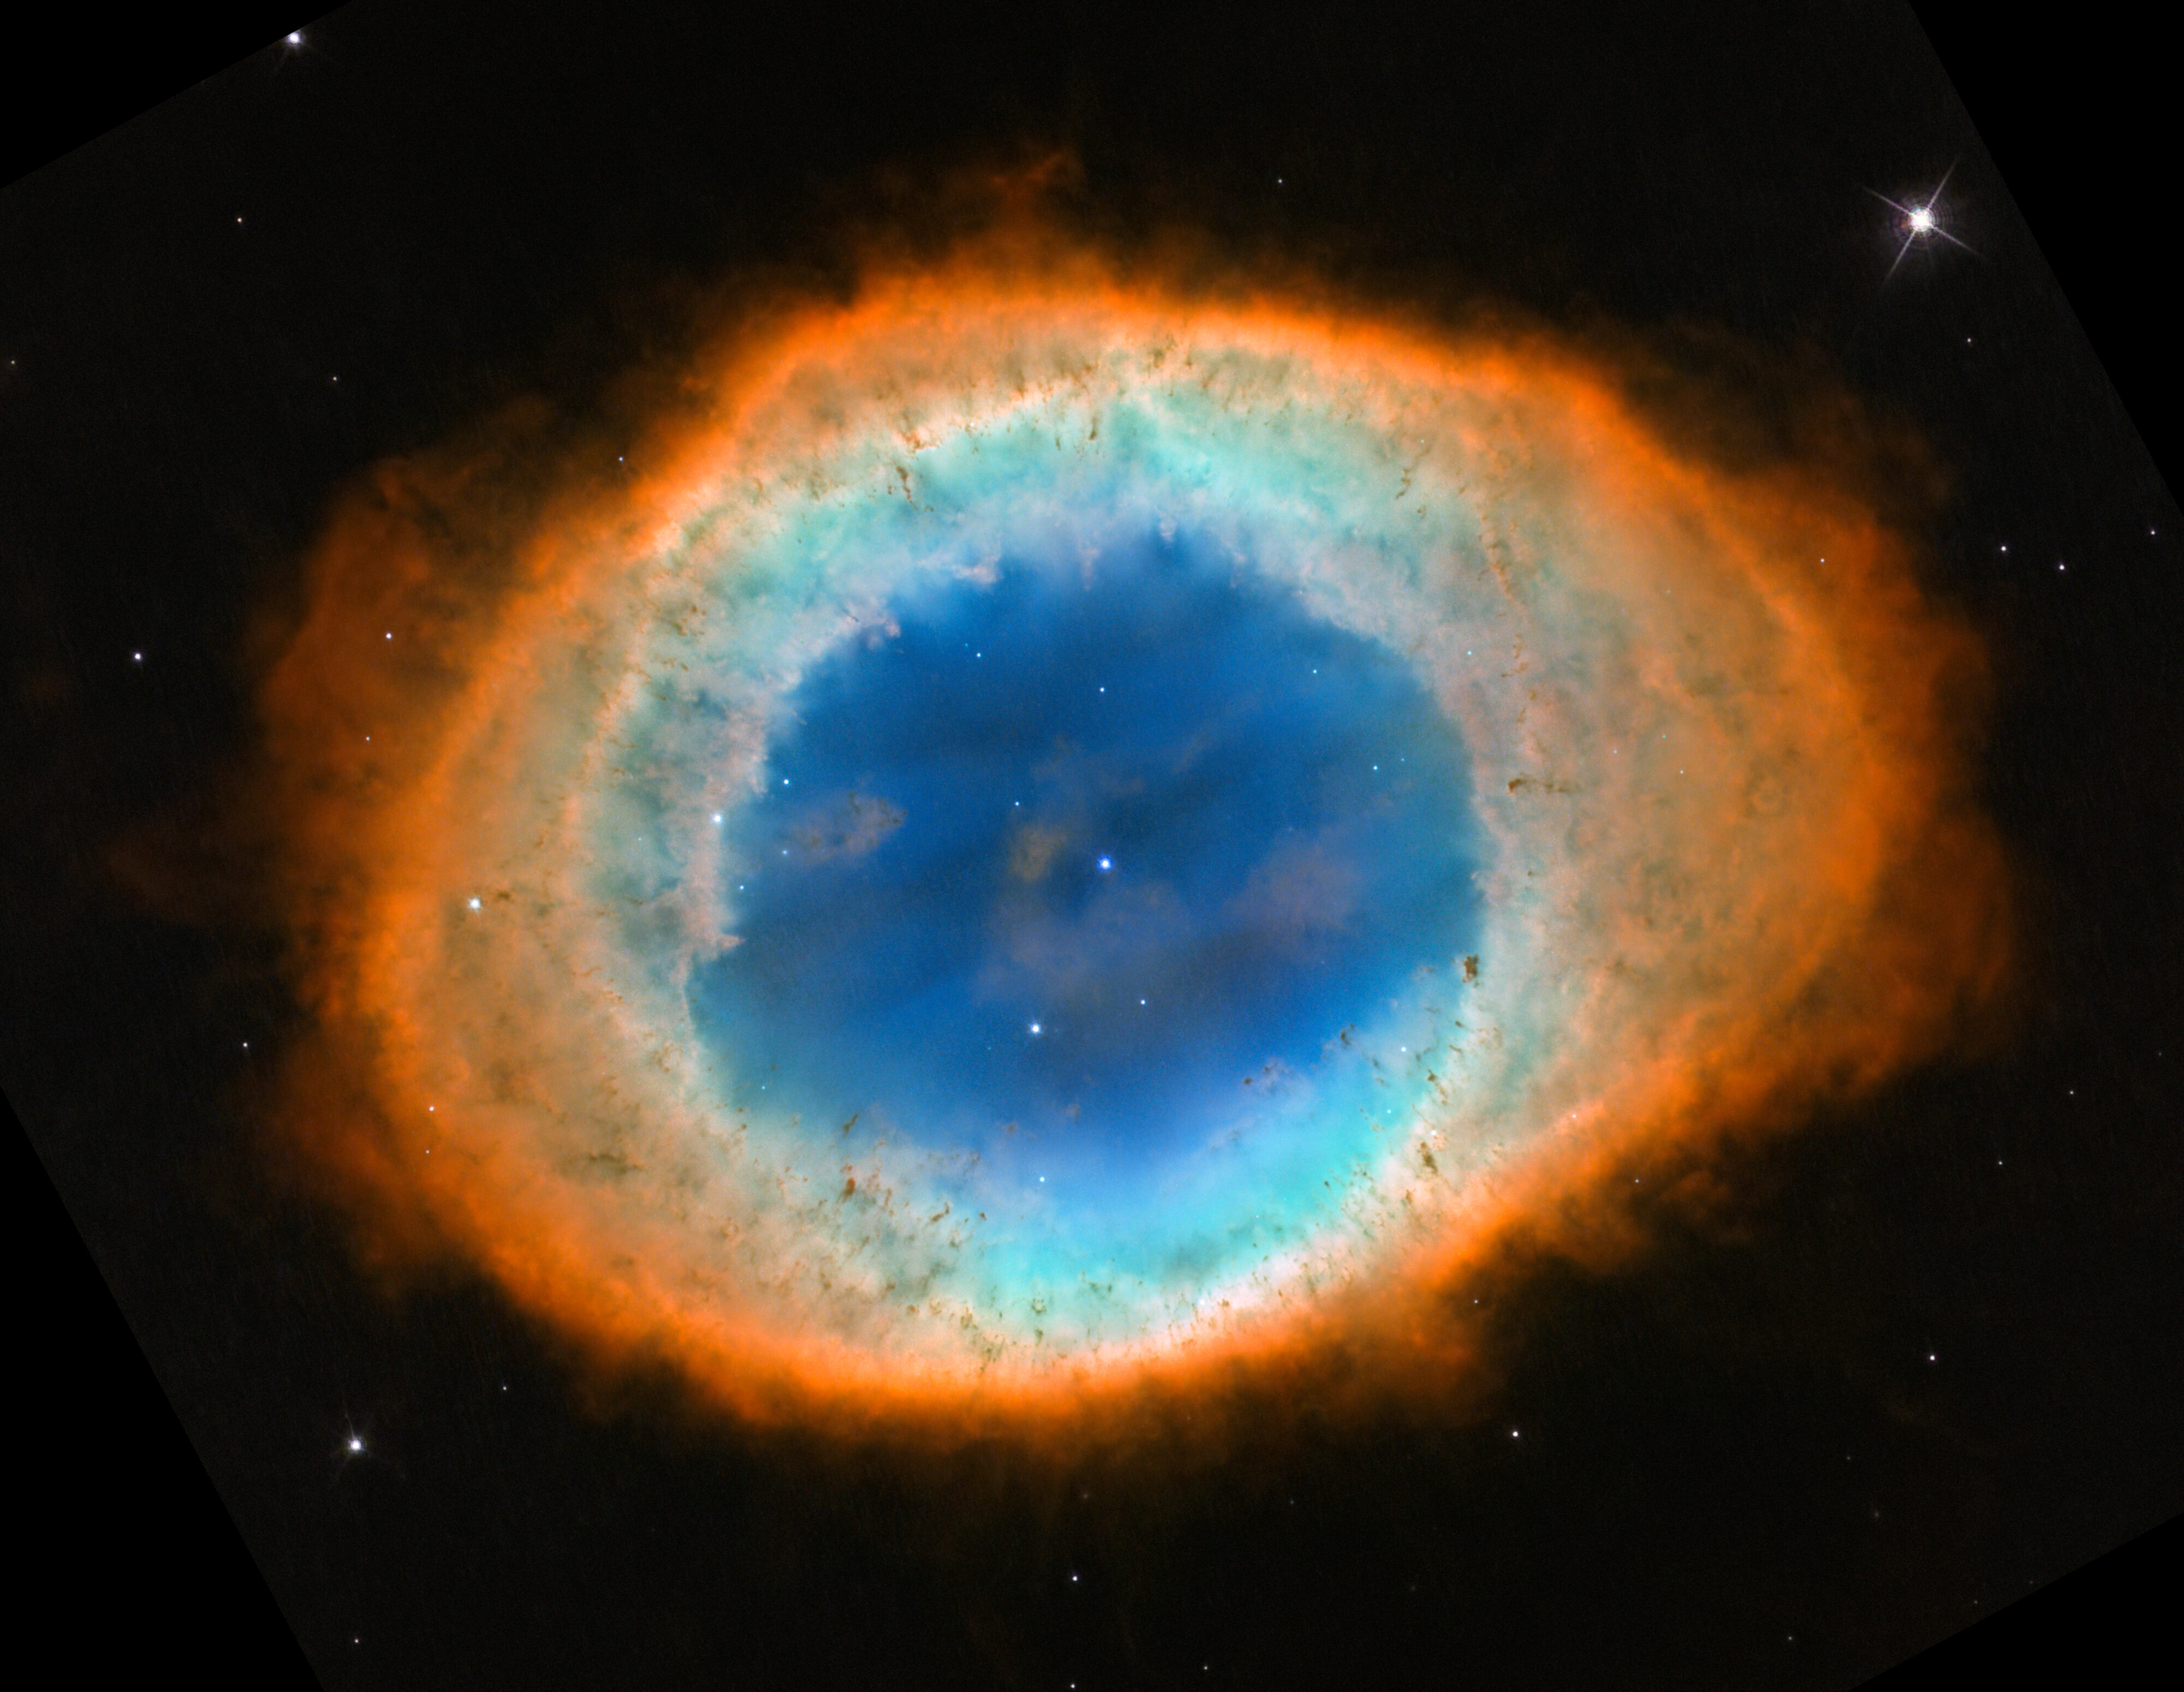 An image of the ring nebula.